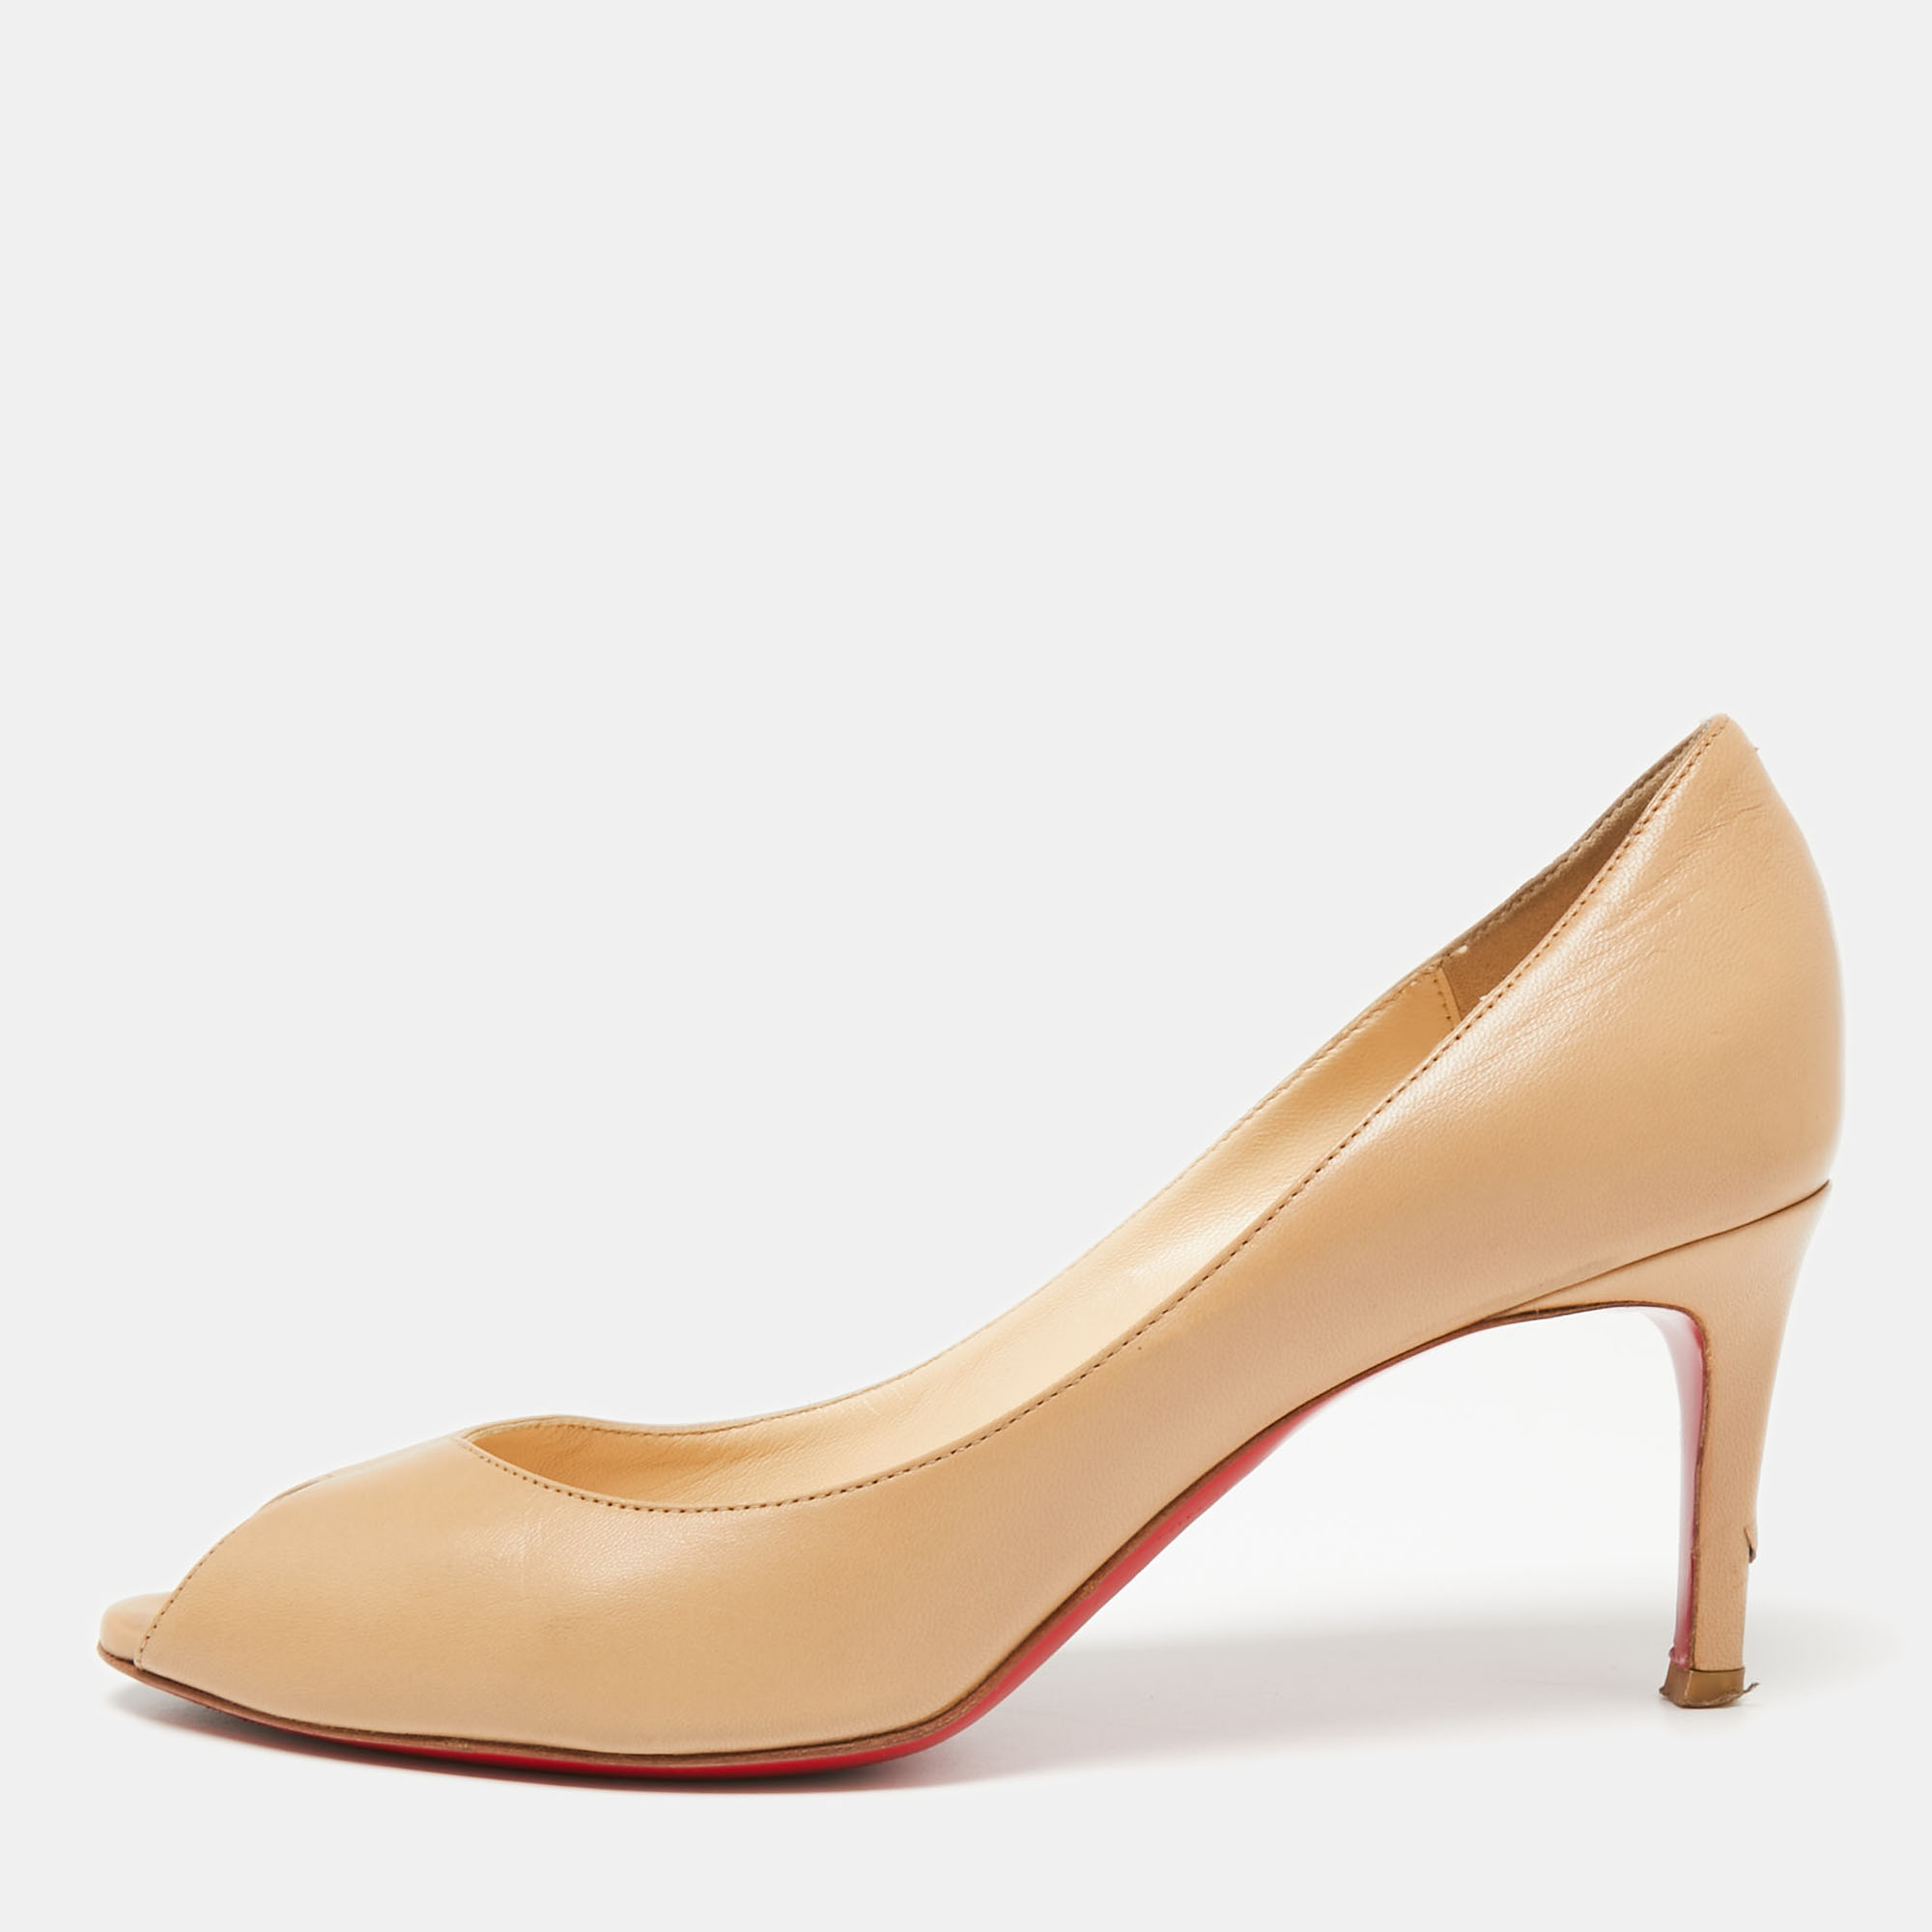 Pre-owned Christian Louboutin Beige Leather Peep-toe Pumps Size 36.5